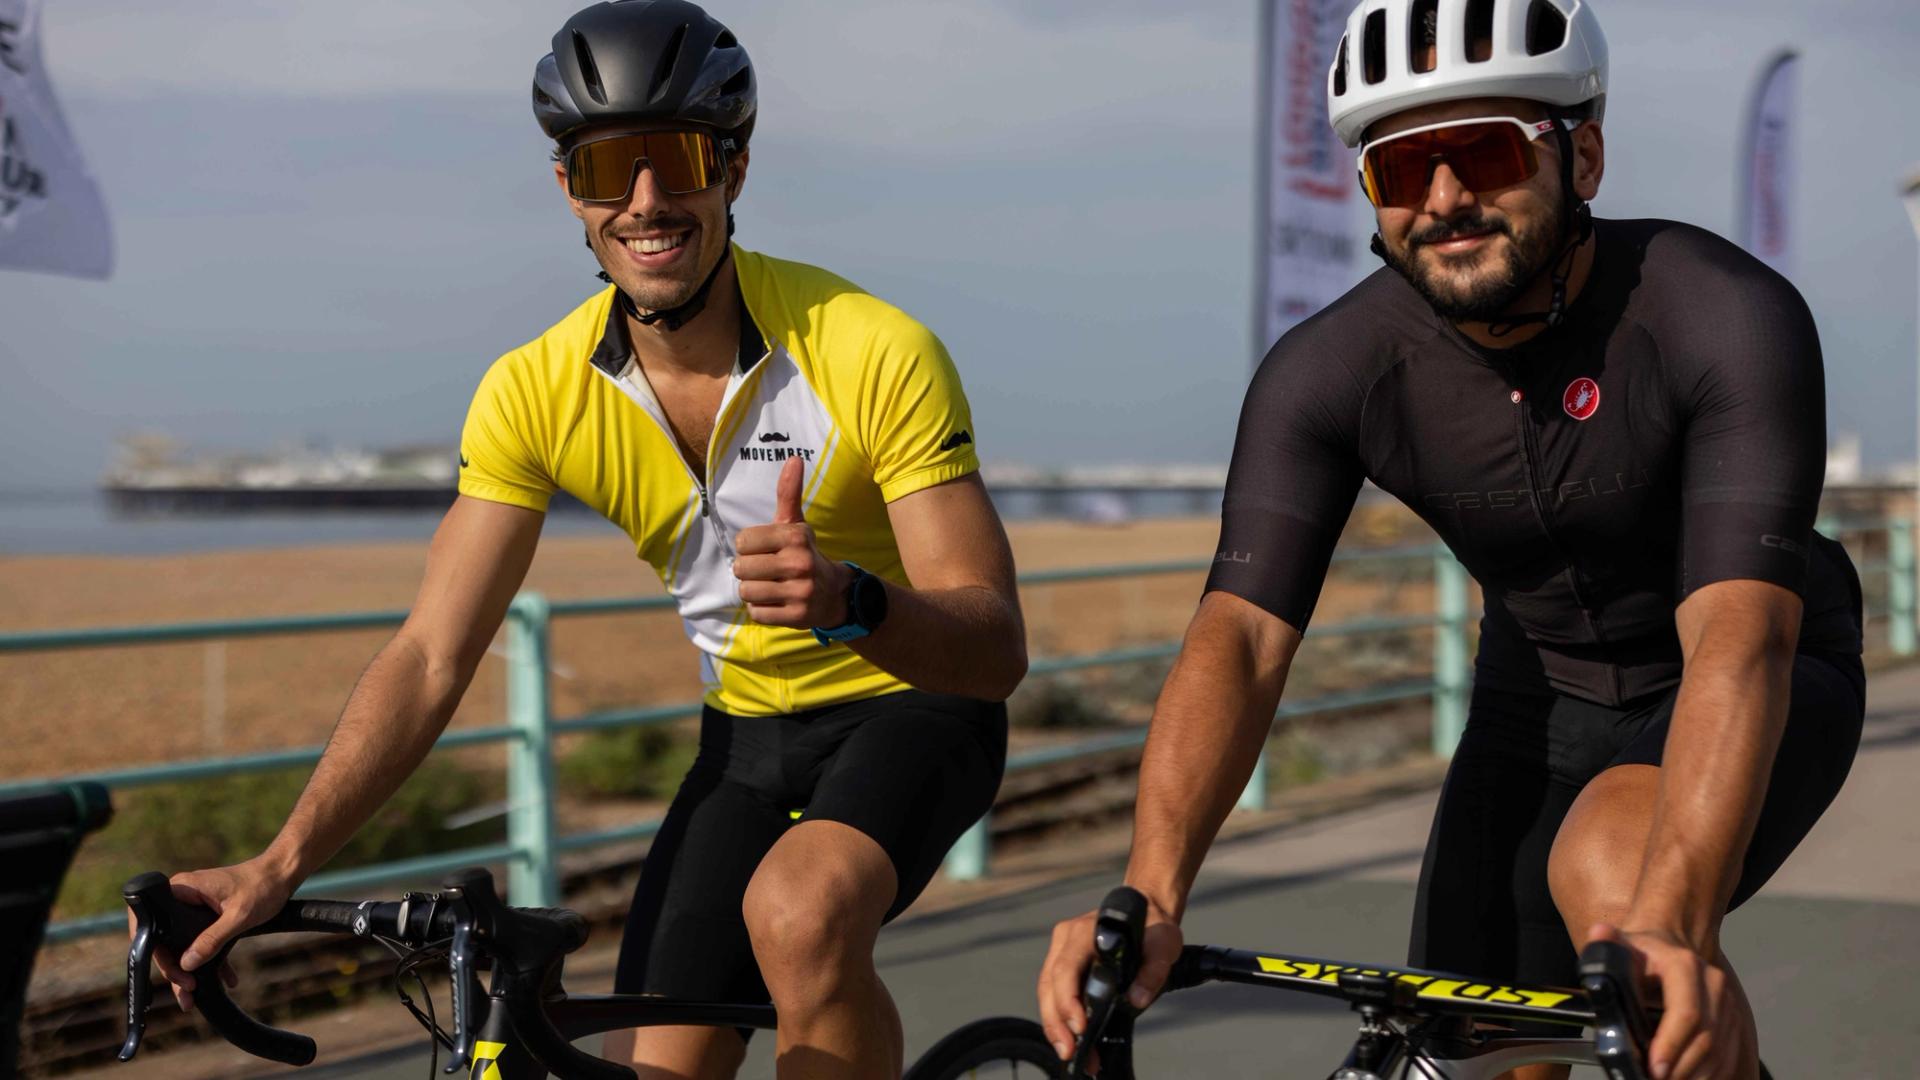 Photo of two cyclists riding bikes, clad in Movember-branded riding gear, smiling to camera.